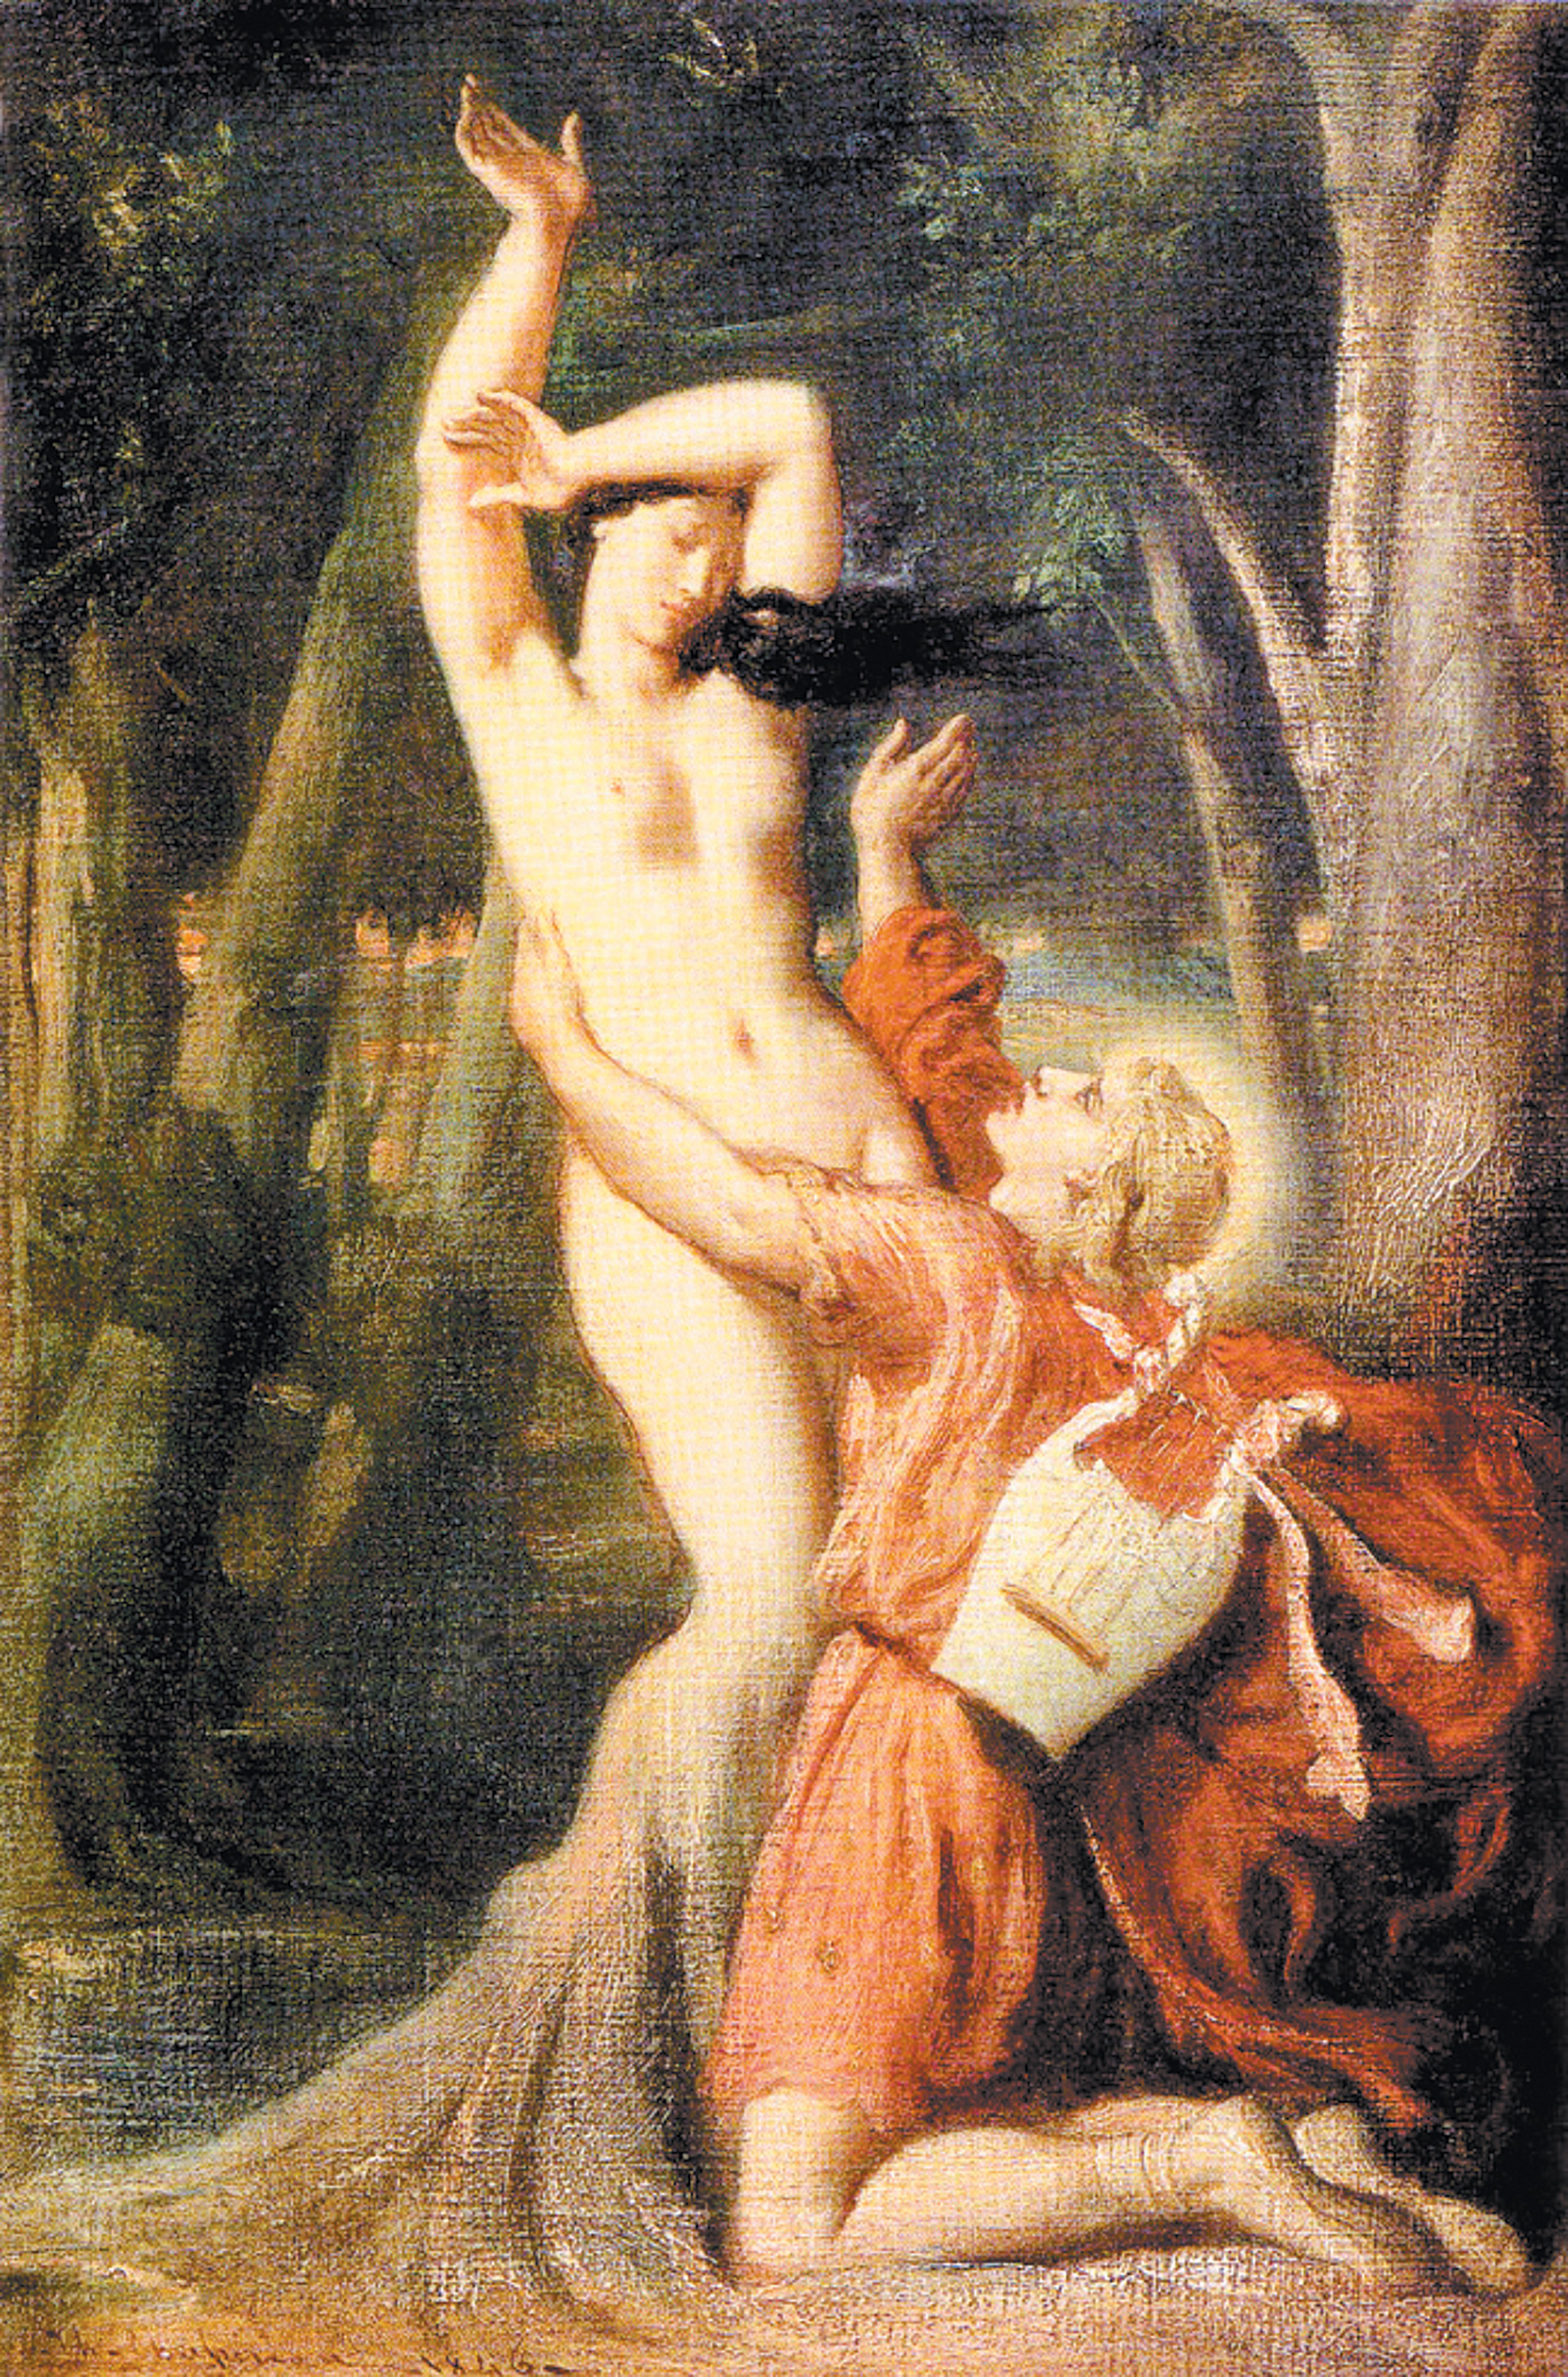 ‘Apollo and Daphne’; painting by Théodore Chassériau, 1845